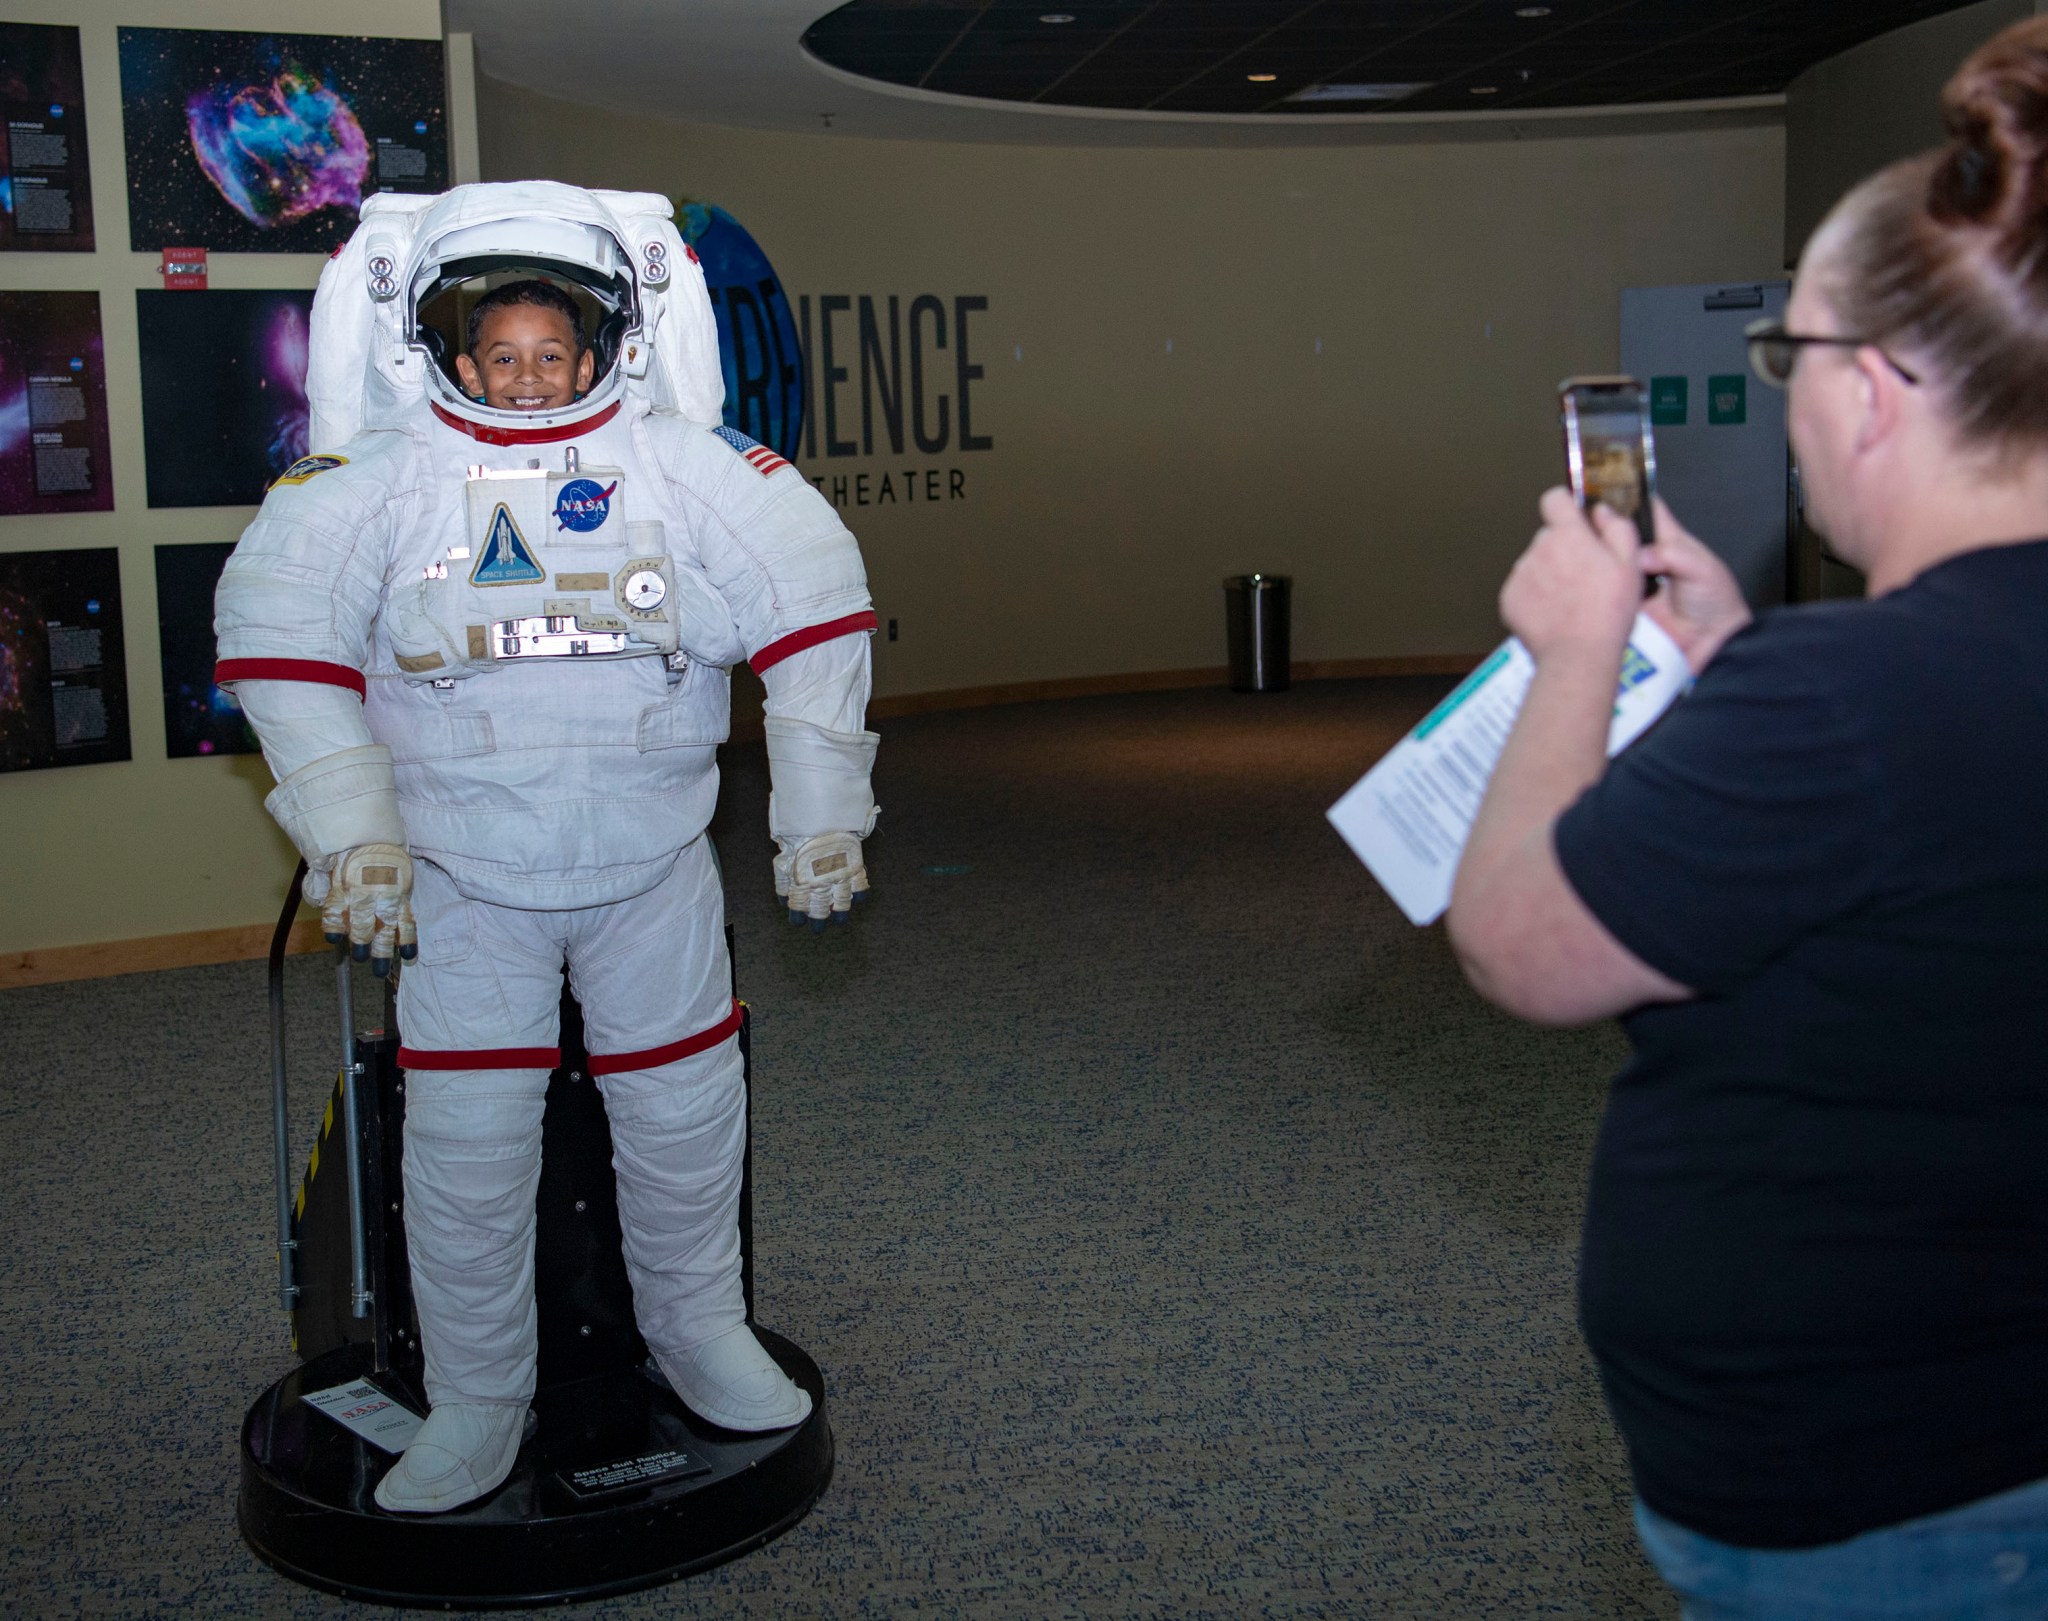 A young visitor “tries on” a NASA spacesuit at INFINITY Science Center.